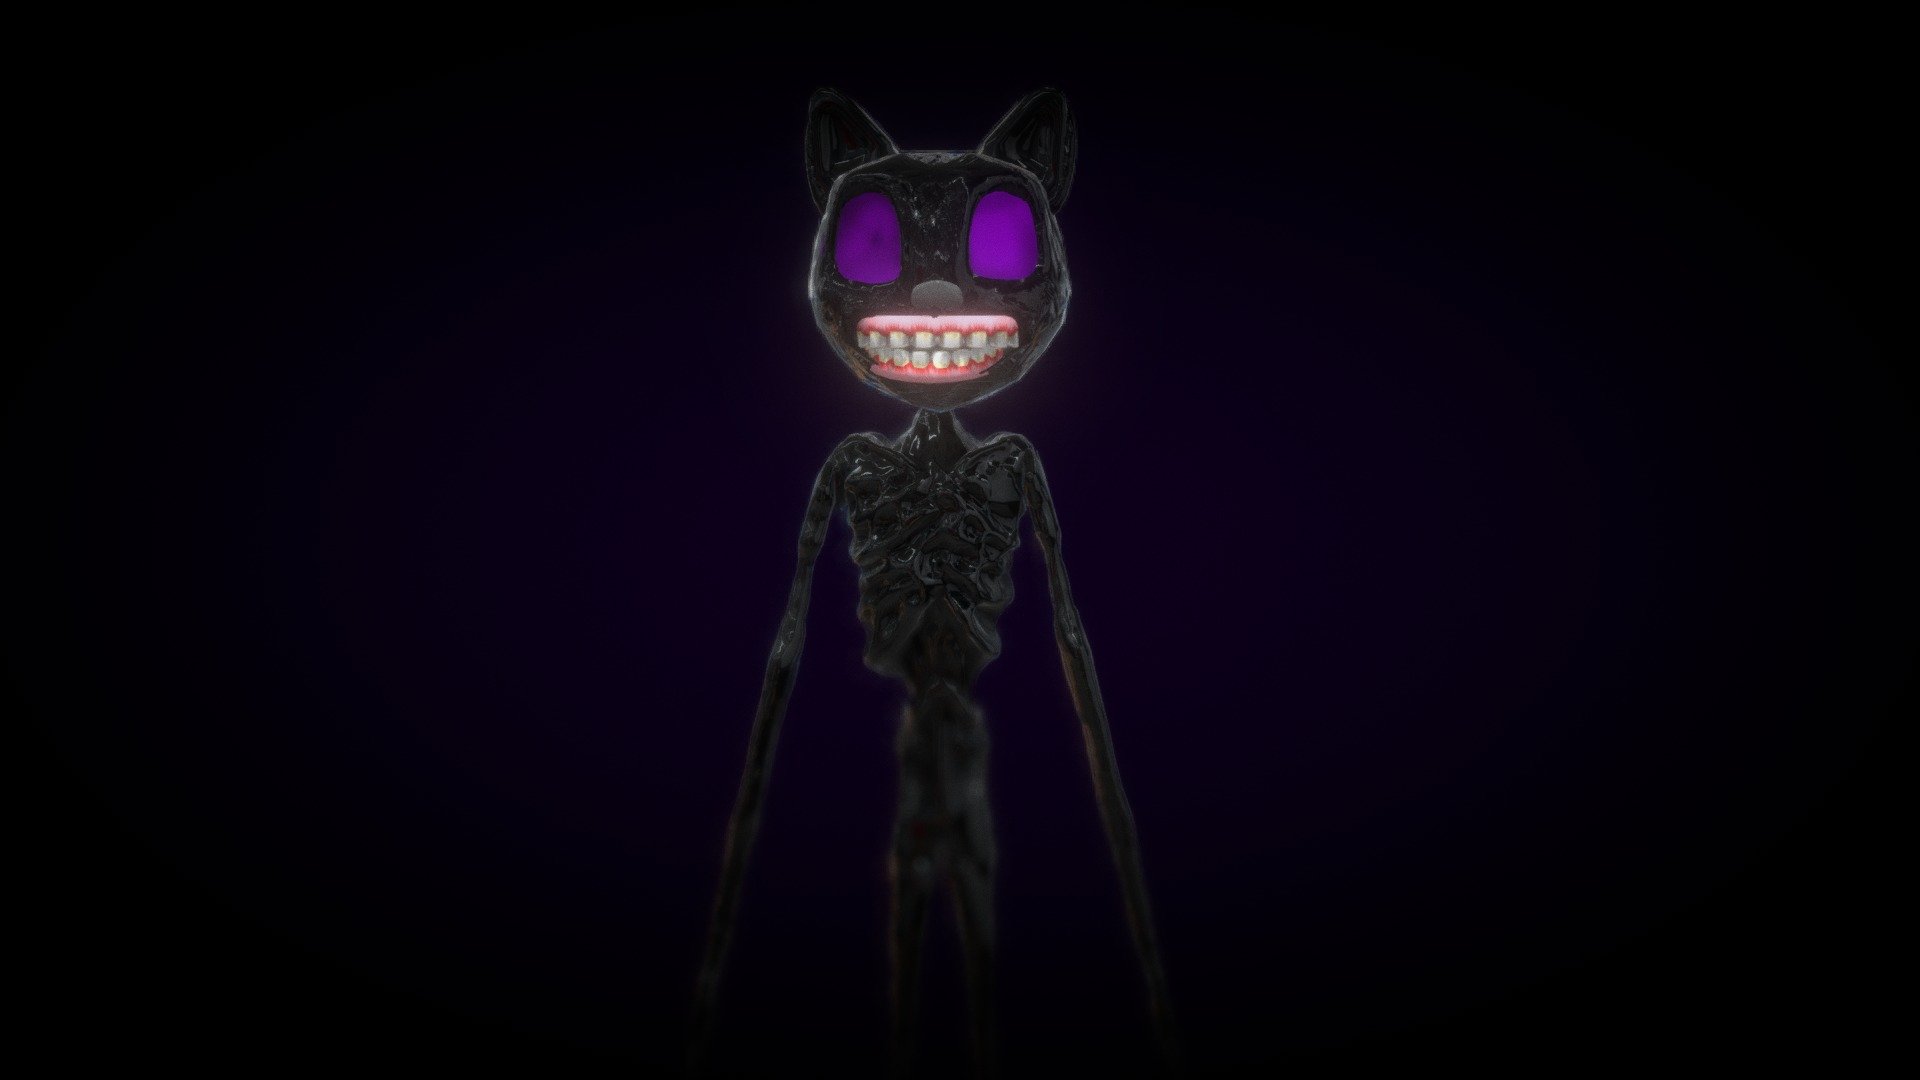 I made this model in Roblox Studio using multiple different parts. I cannot even name them all, so I will just say the basics. The head is Cartoon Cat from GMOD (the old version) and the body is a Siren Head 3d model